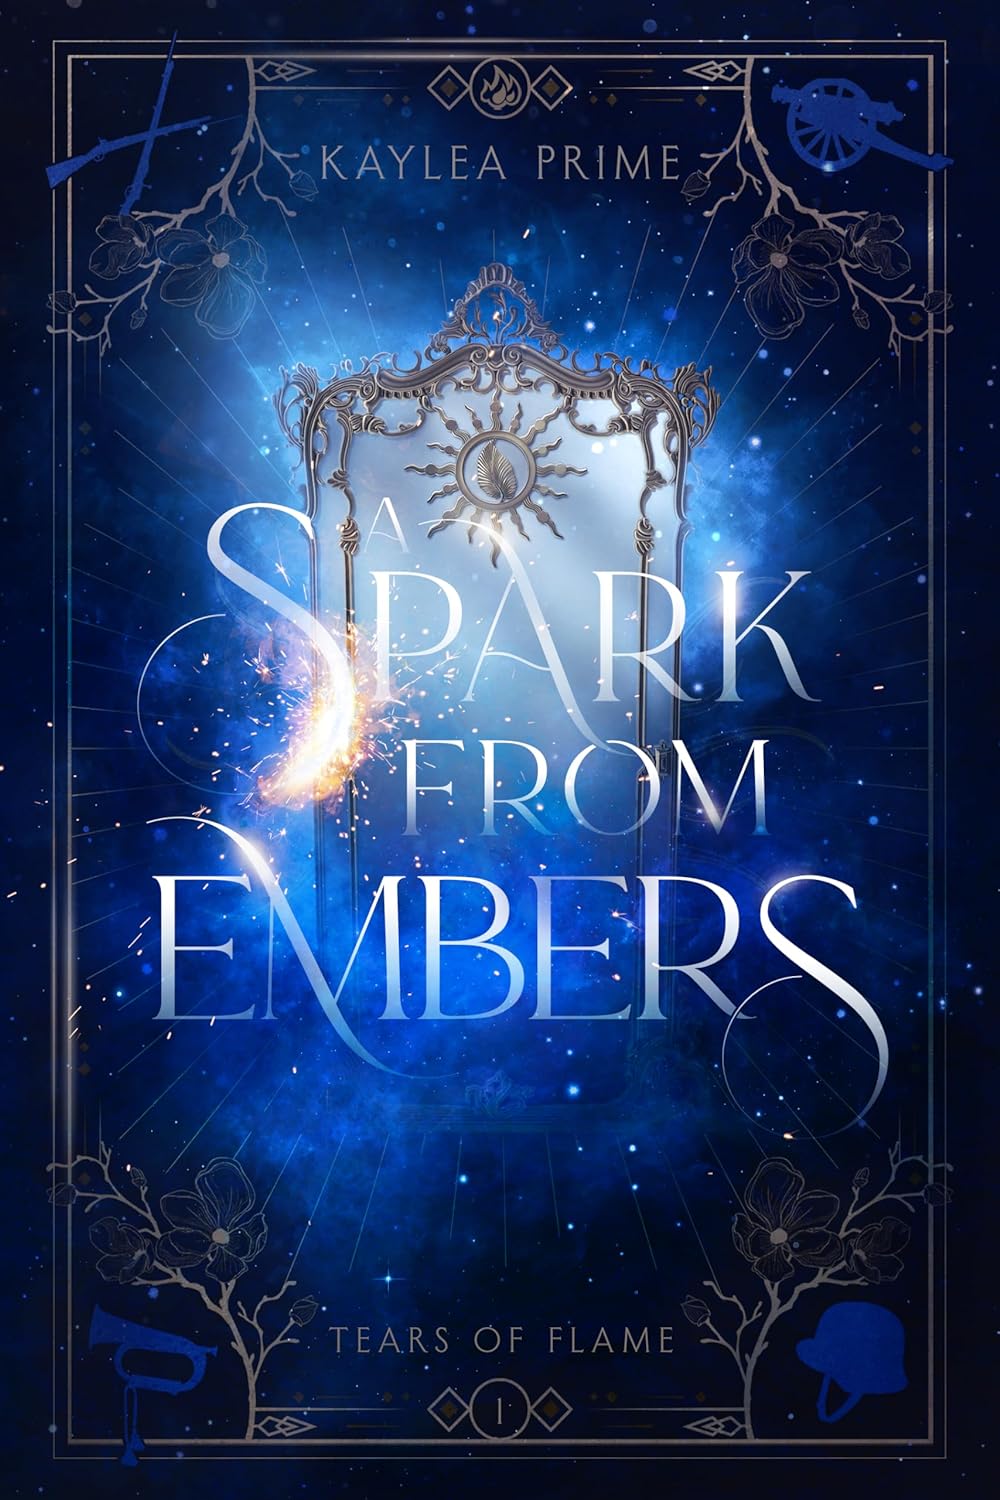 A Spark from Embers